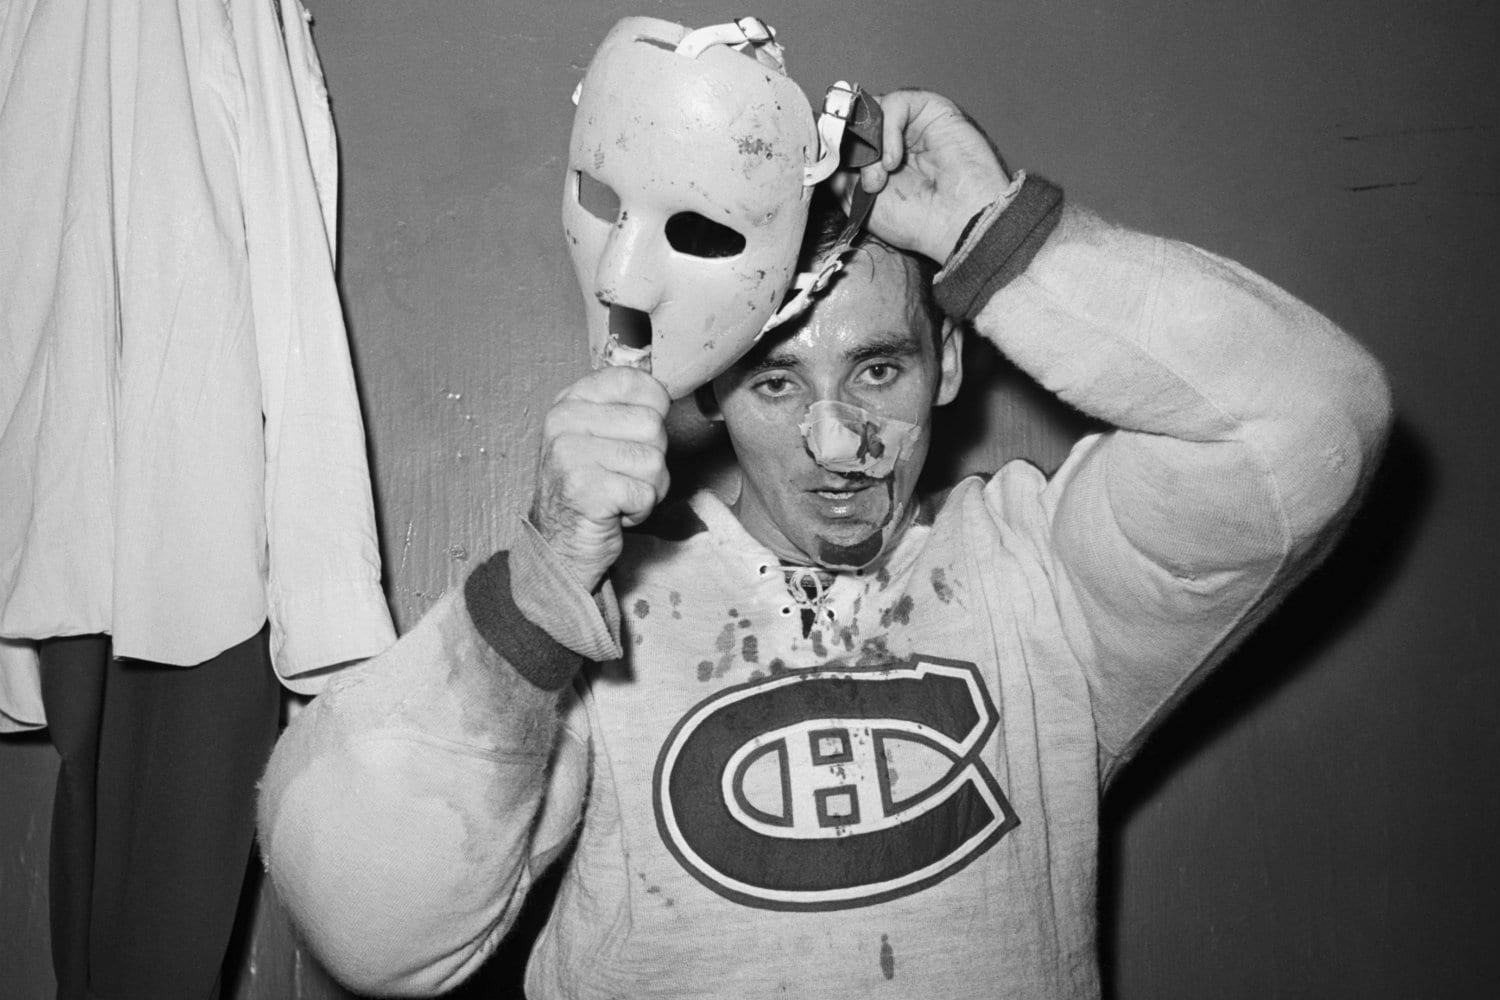 Jacques Plante had one of the best goalie masks